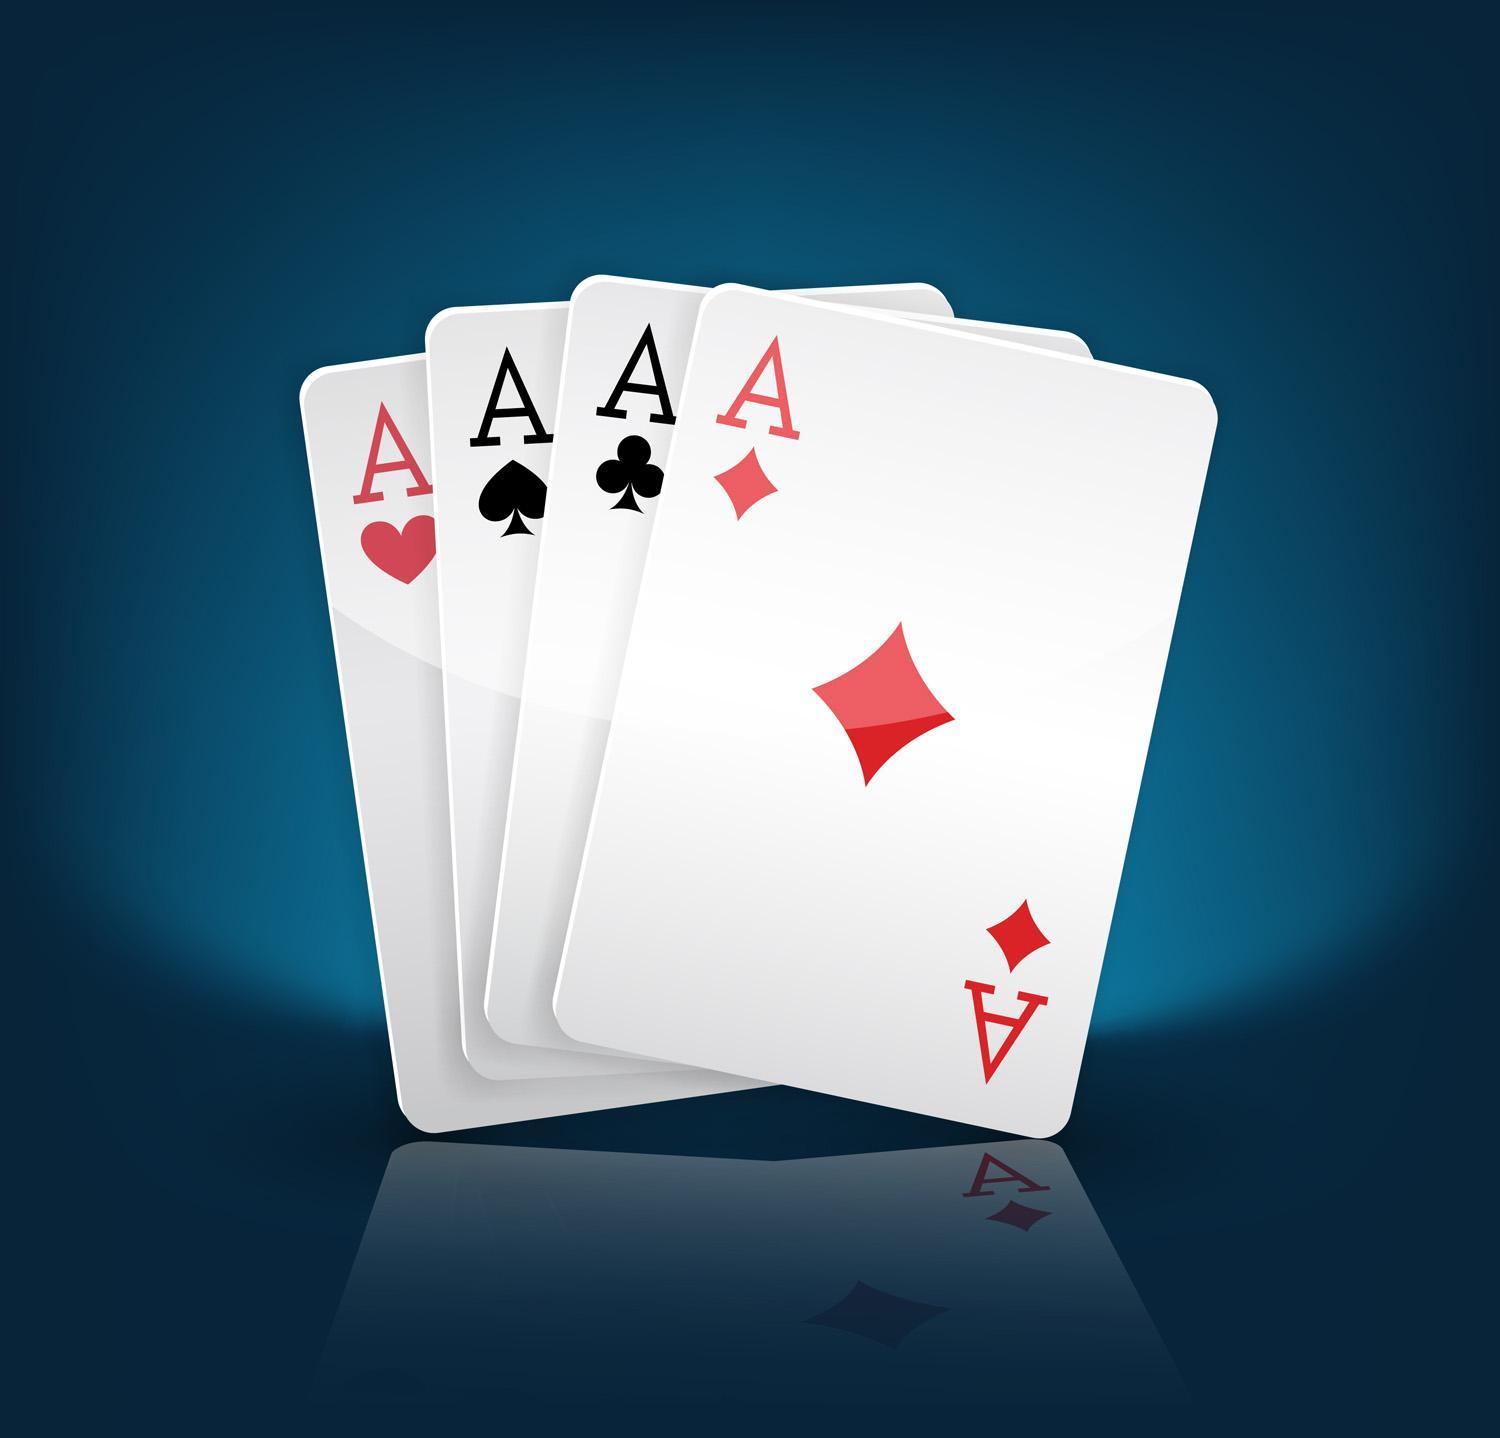 play-cards-online-free-play-cards-royalty-free-vector-image